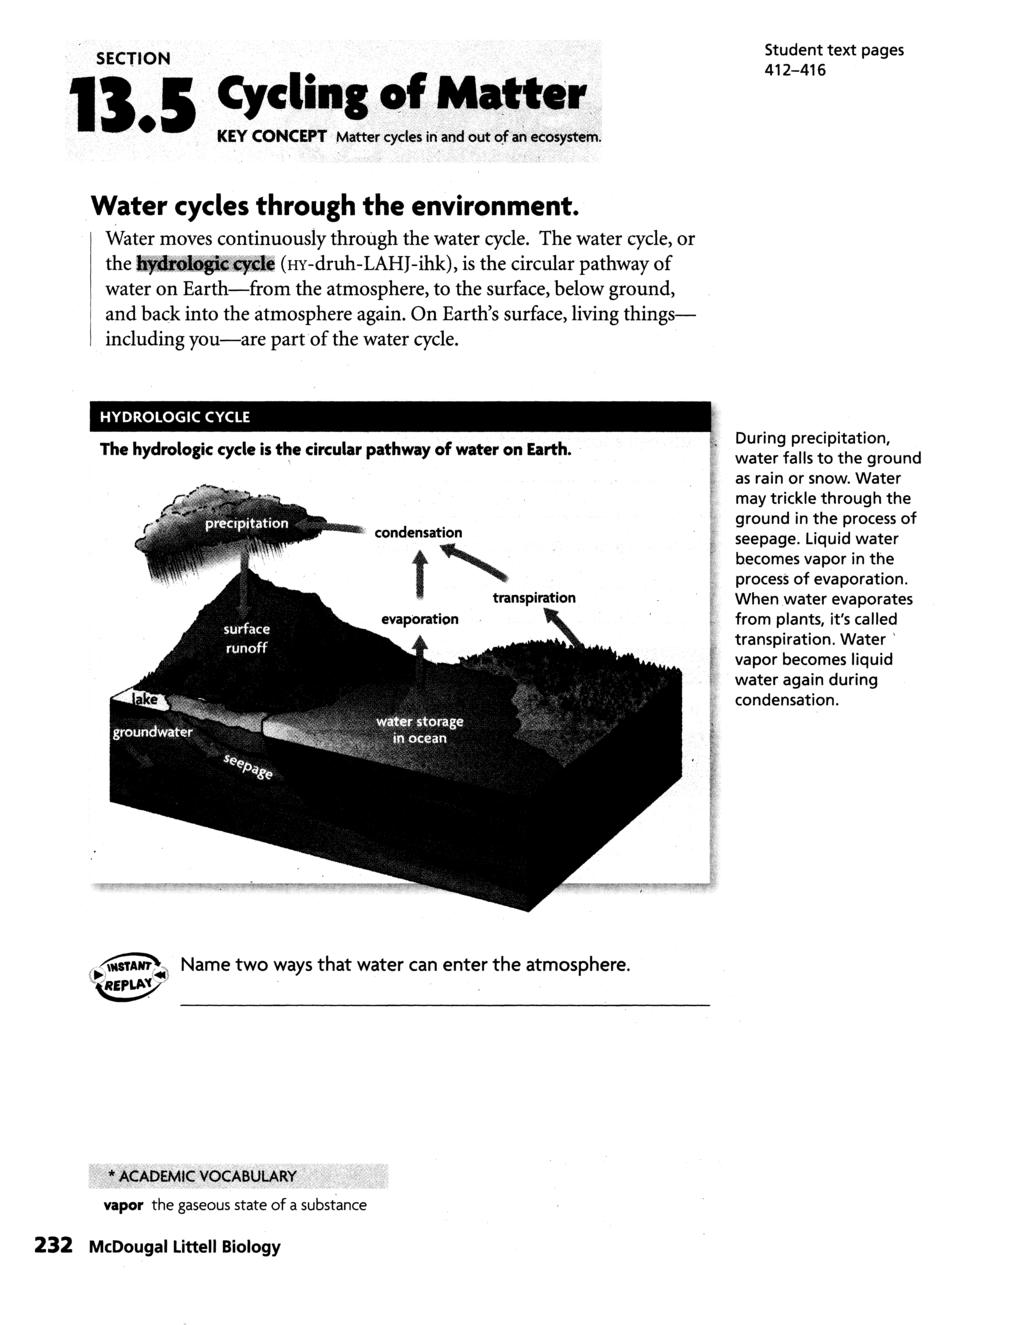 13.5 SECTION Cycling of Matter KEY CONCEPT Matter cycles in and out of an ecosystem. Student text pages 412-416 Water cycles through the environment. Water moves continuously through the water cycle.